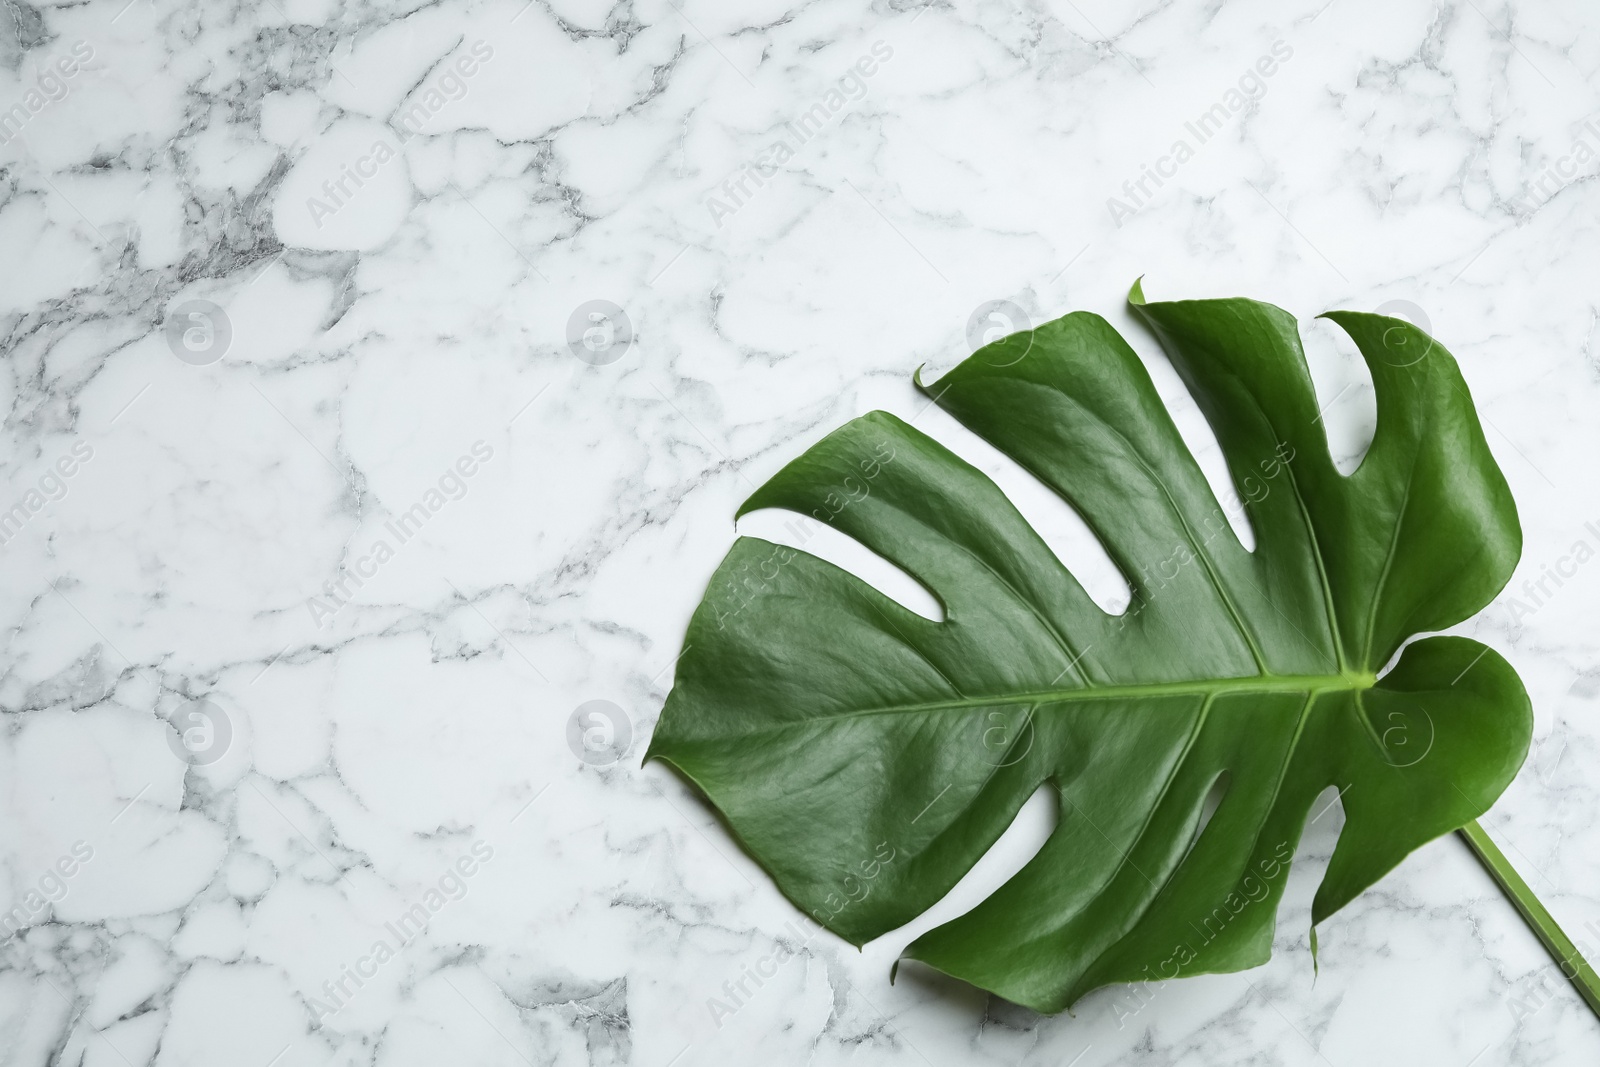 Photo of Leaf of tropical monstera plant on marble background, top view with space for text